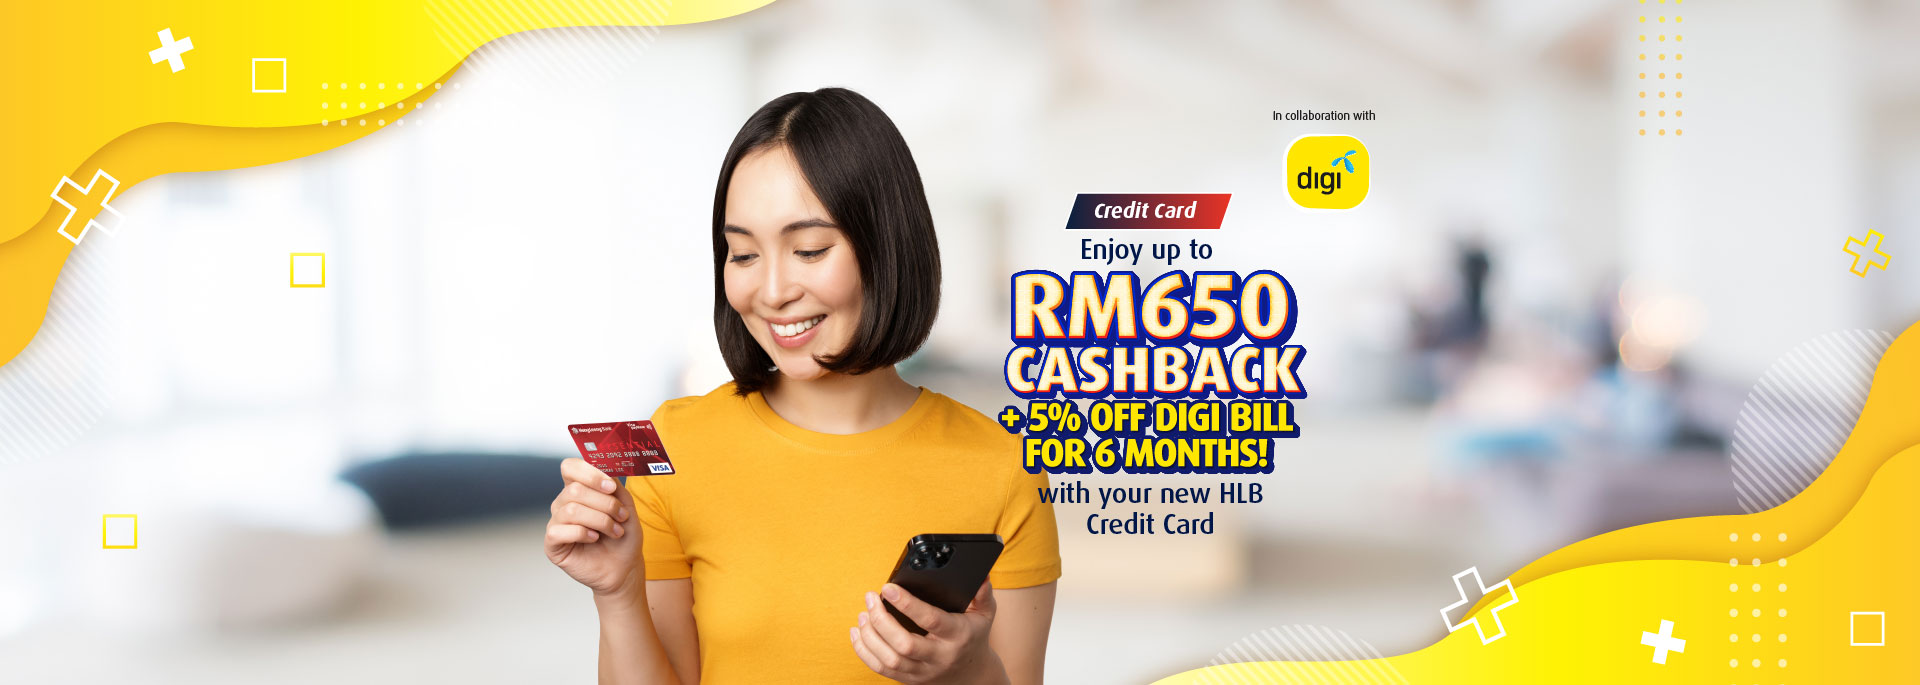 Just for you, Digi users! Getting up to RM650 Cashback and 5% discount on your Digi bills